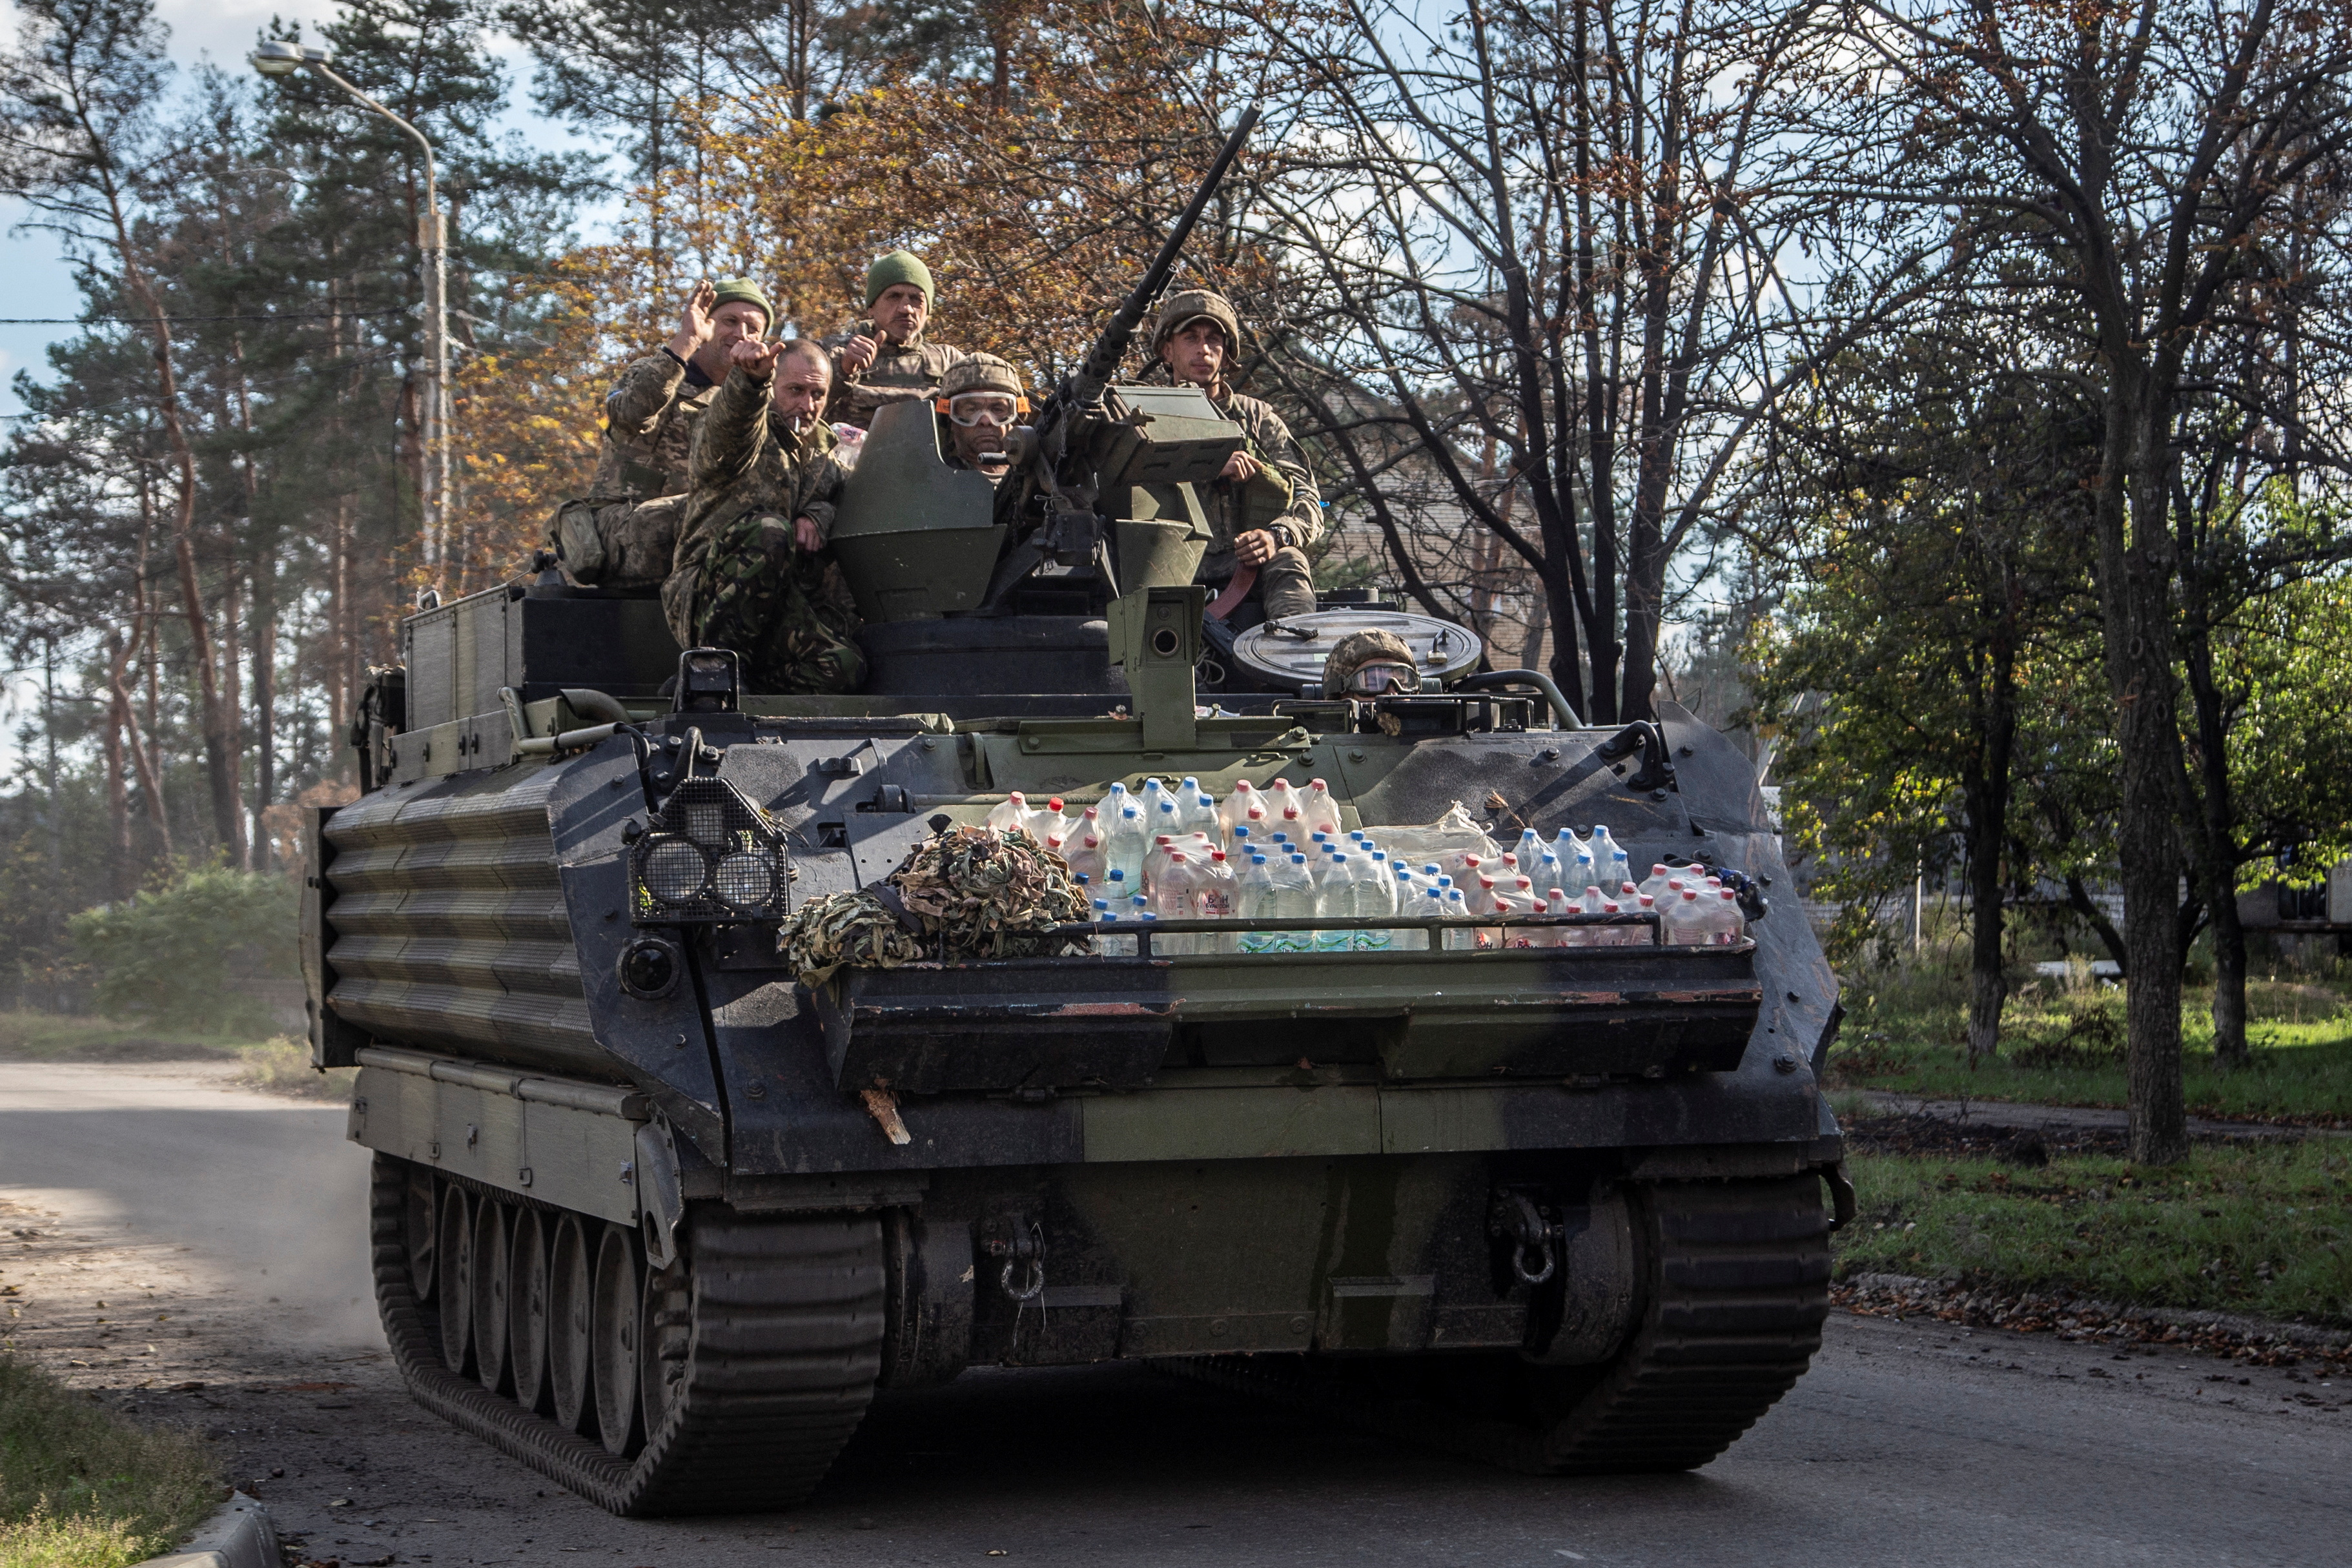 An M113 donated by the US and used by the Ukrainian forces against the Russian invasion (REUTERS / Oleksandr Ratushniak)